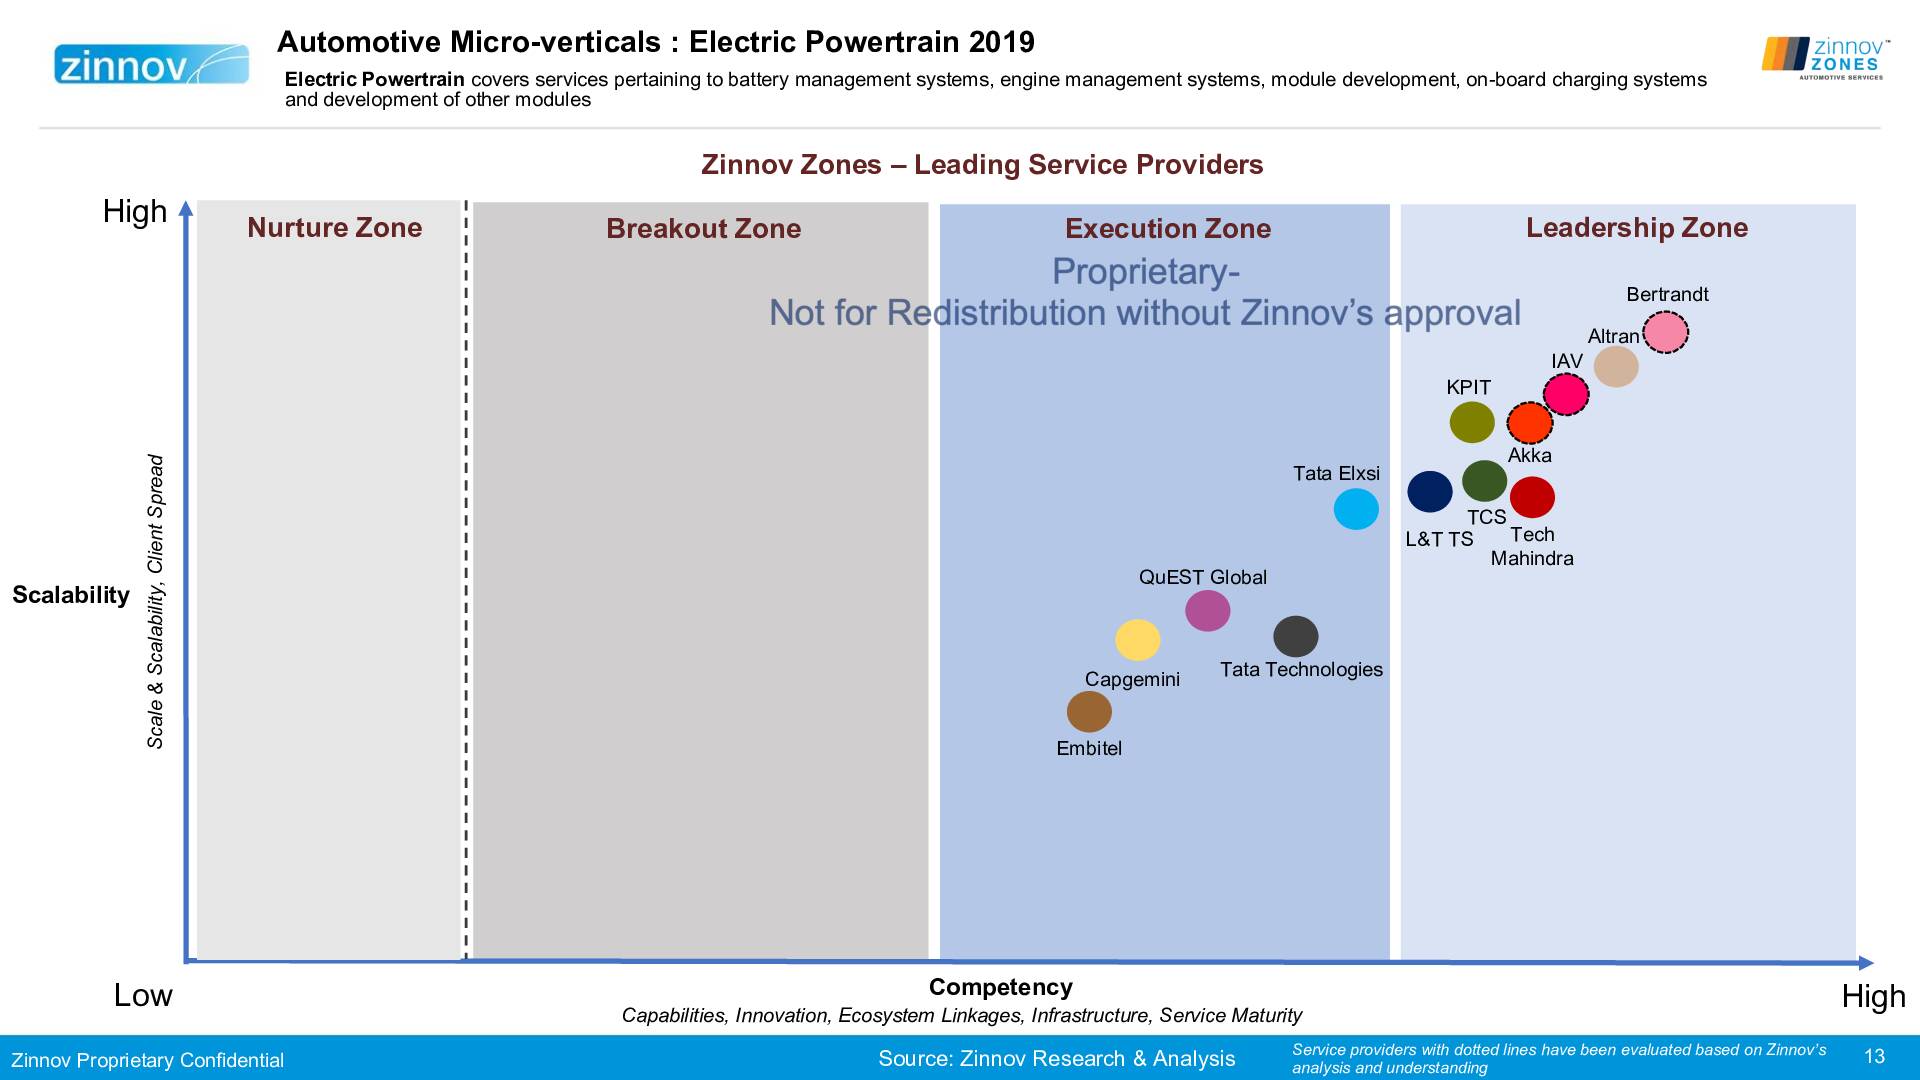 Zinnov Zones Automotive E Rd Services 2019 Ratings13